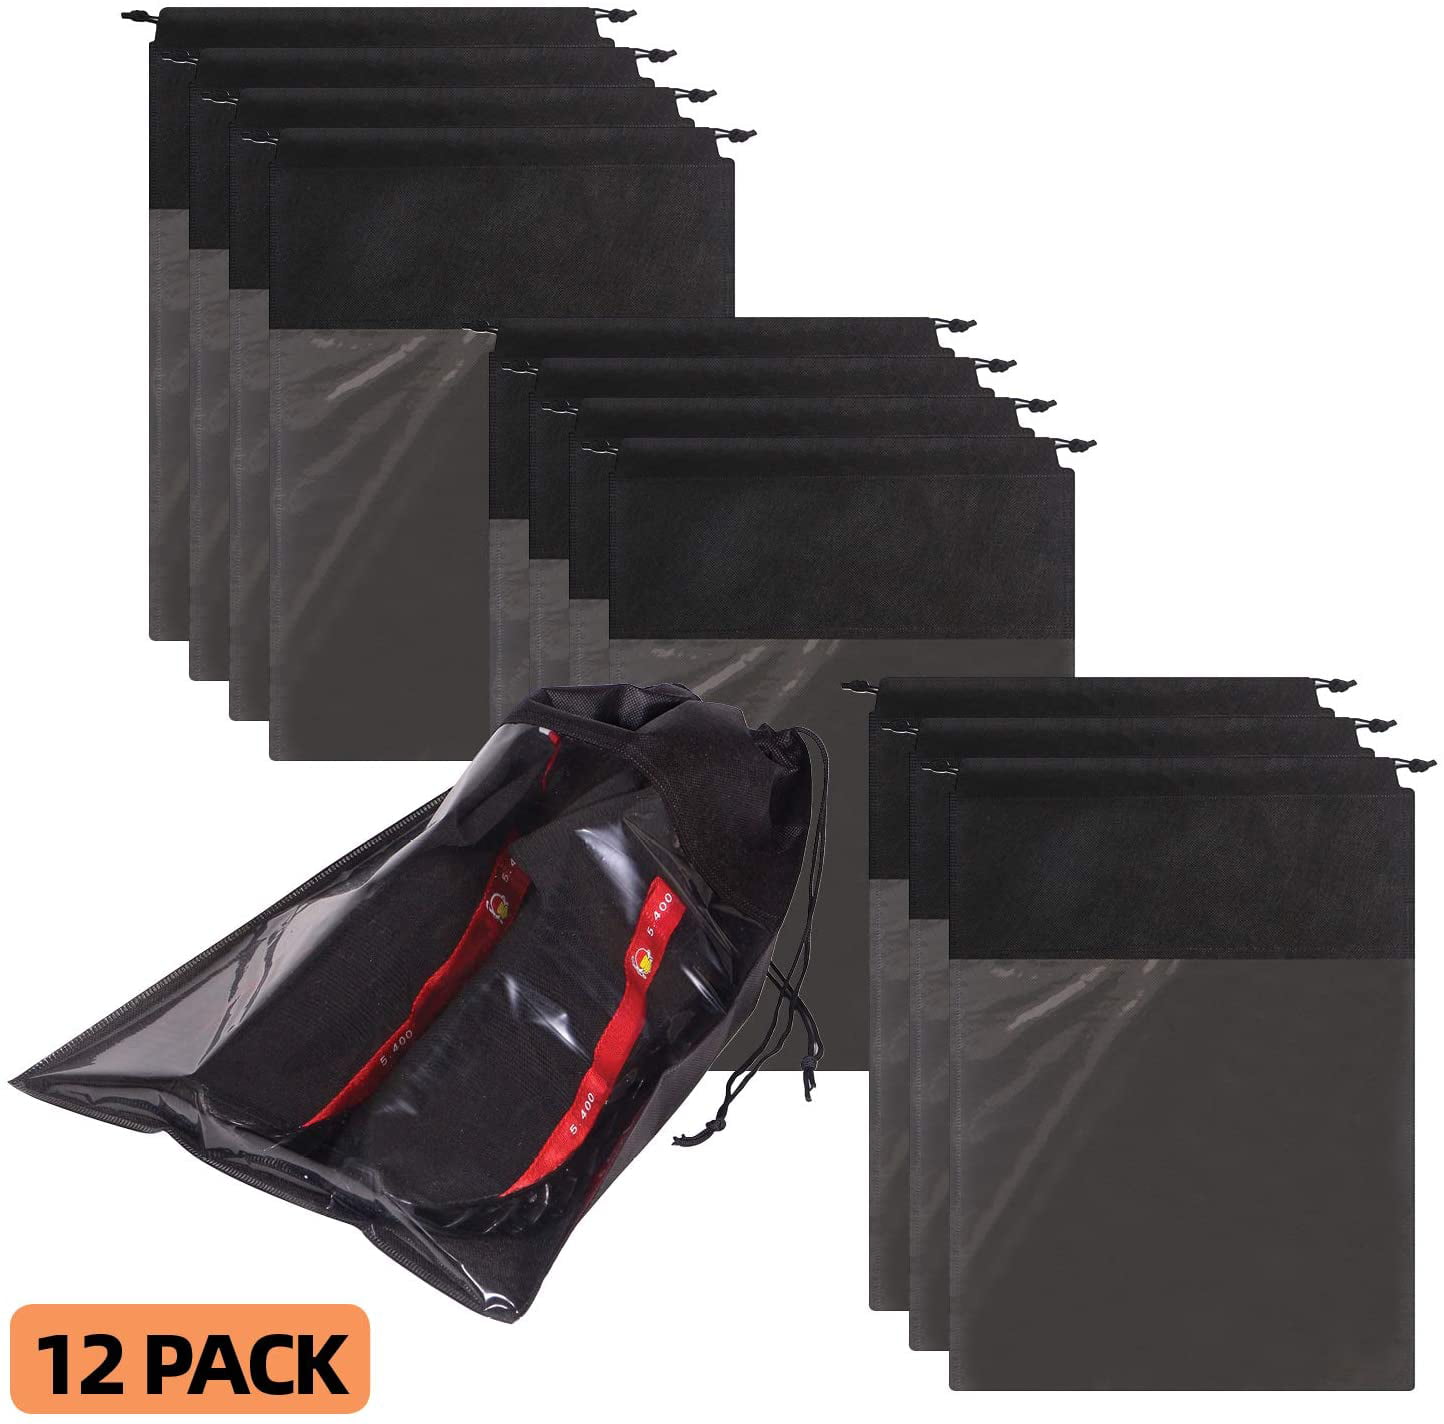 10Pack Shoes Bags Travel Storage Dust Proof Organizer Bag with Drawstring Pouch 